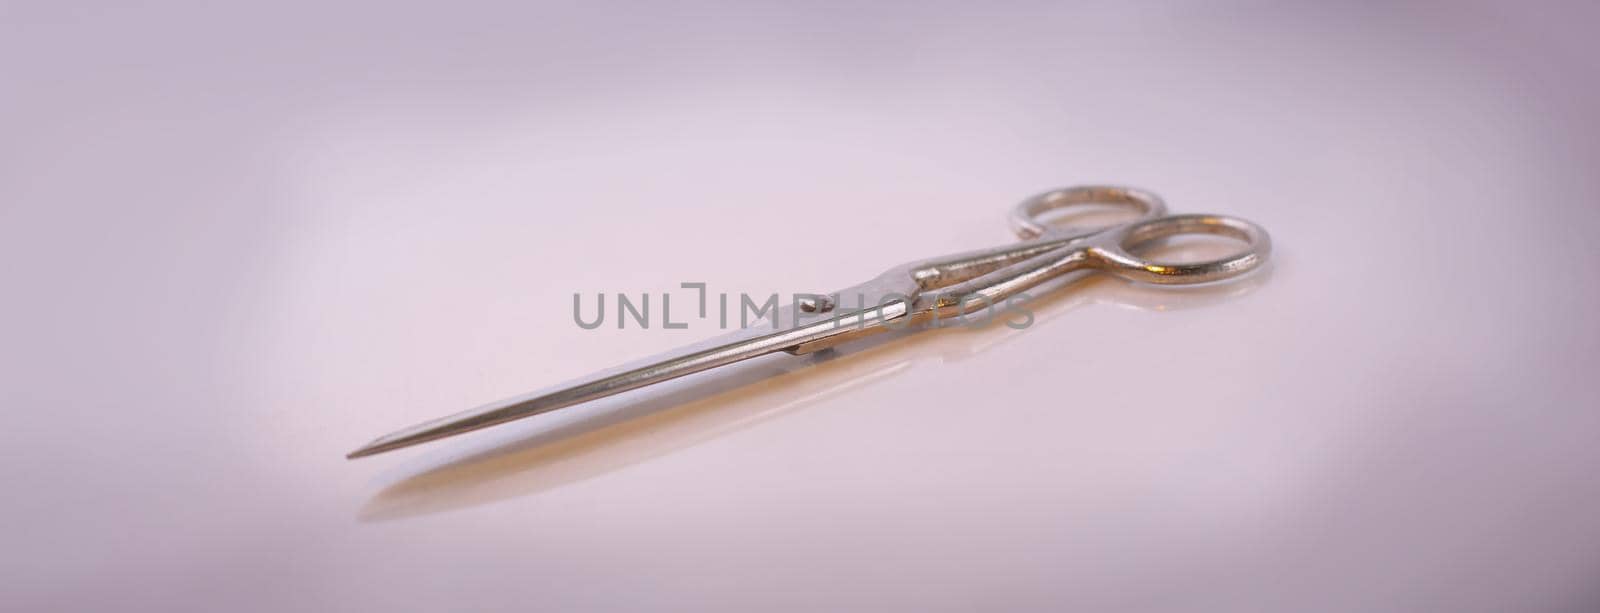 scissors made of metal.isolated on a light background.photo with copy space